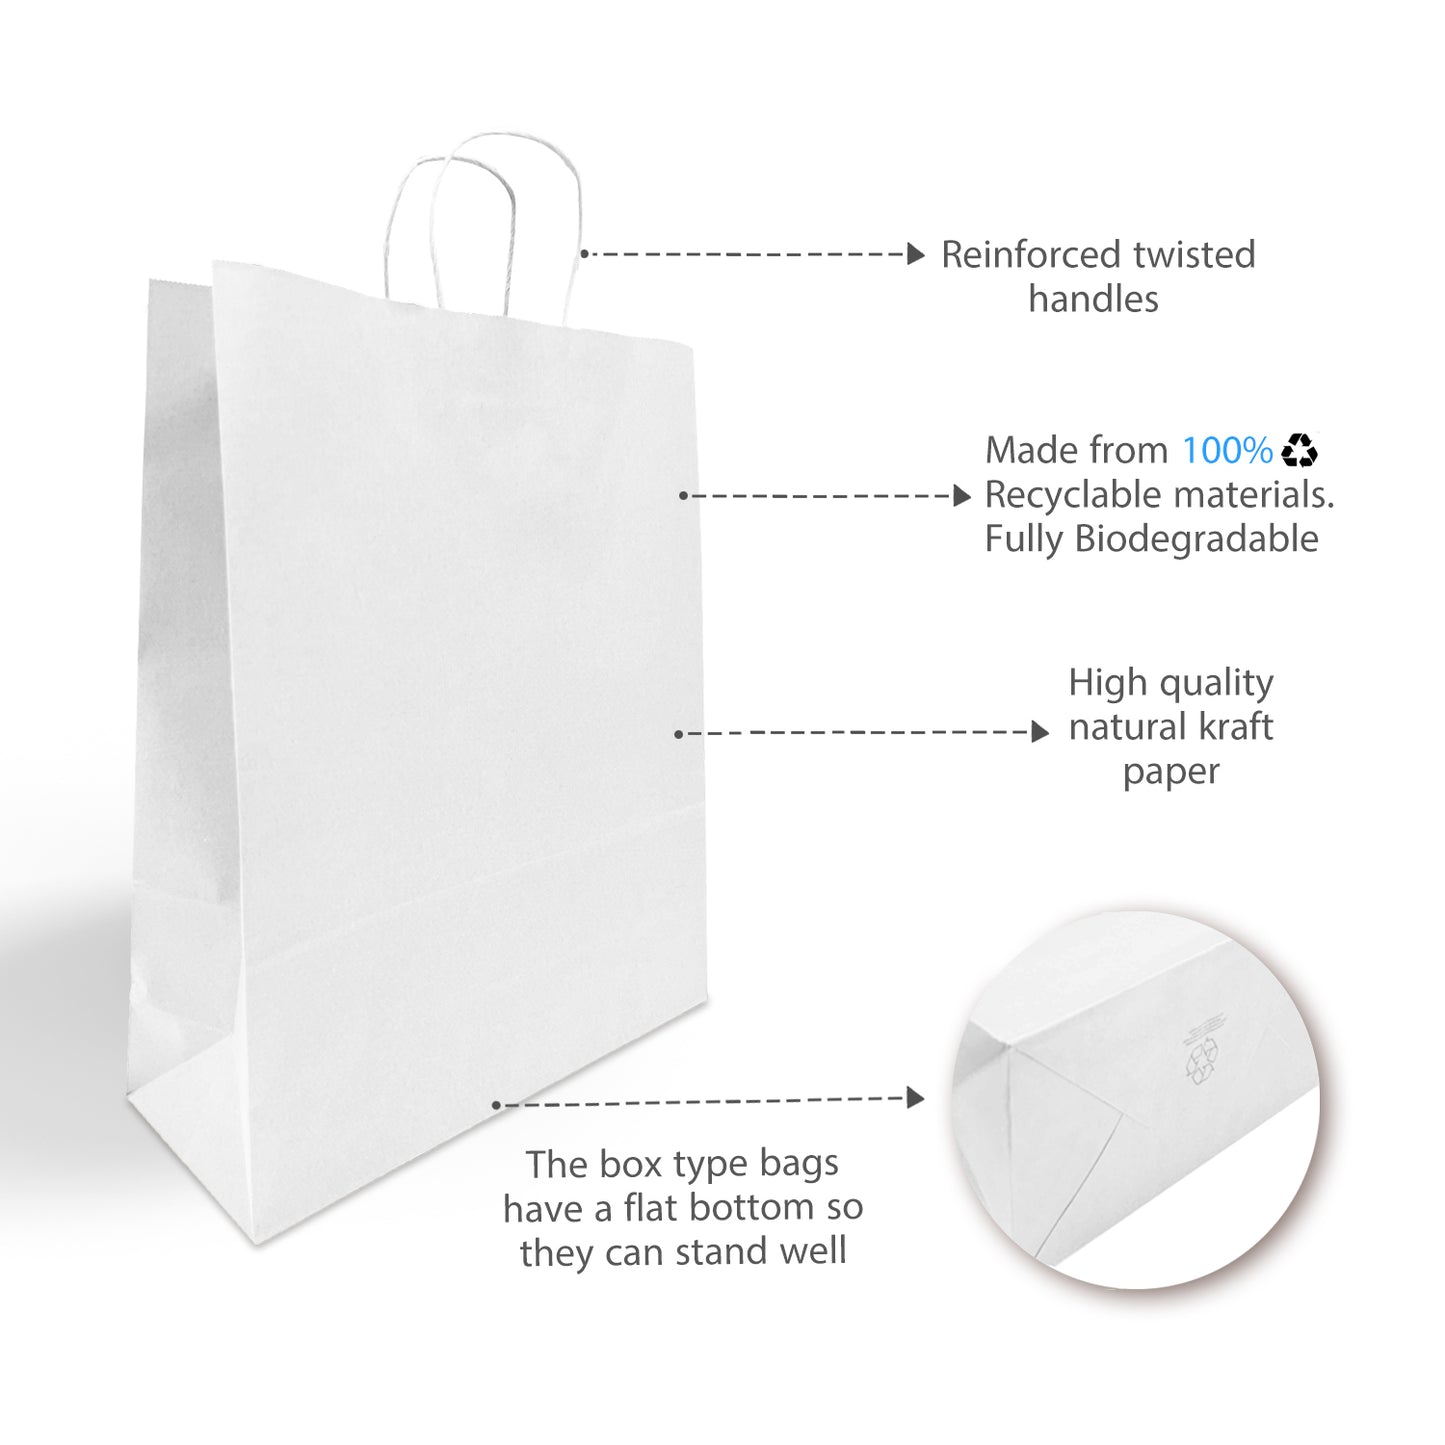 200 Pcs, Queen, 16x6x19.25 inches, White Kraft Paper Bags, with Twisted Handles